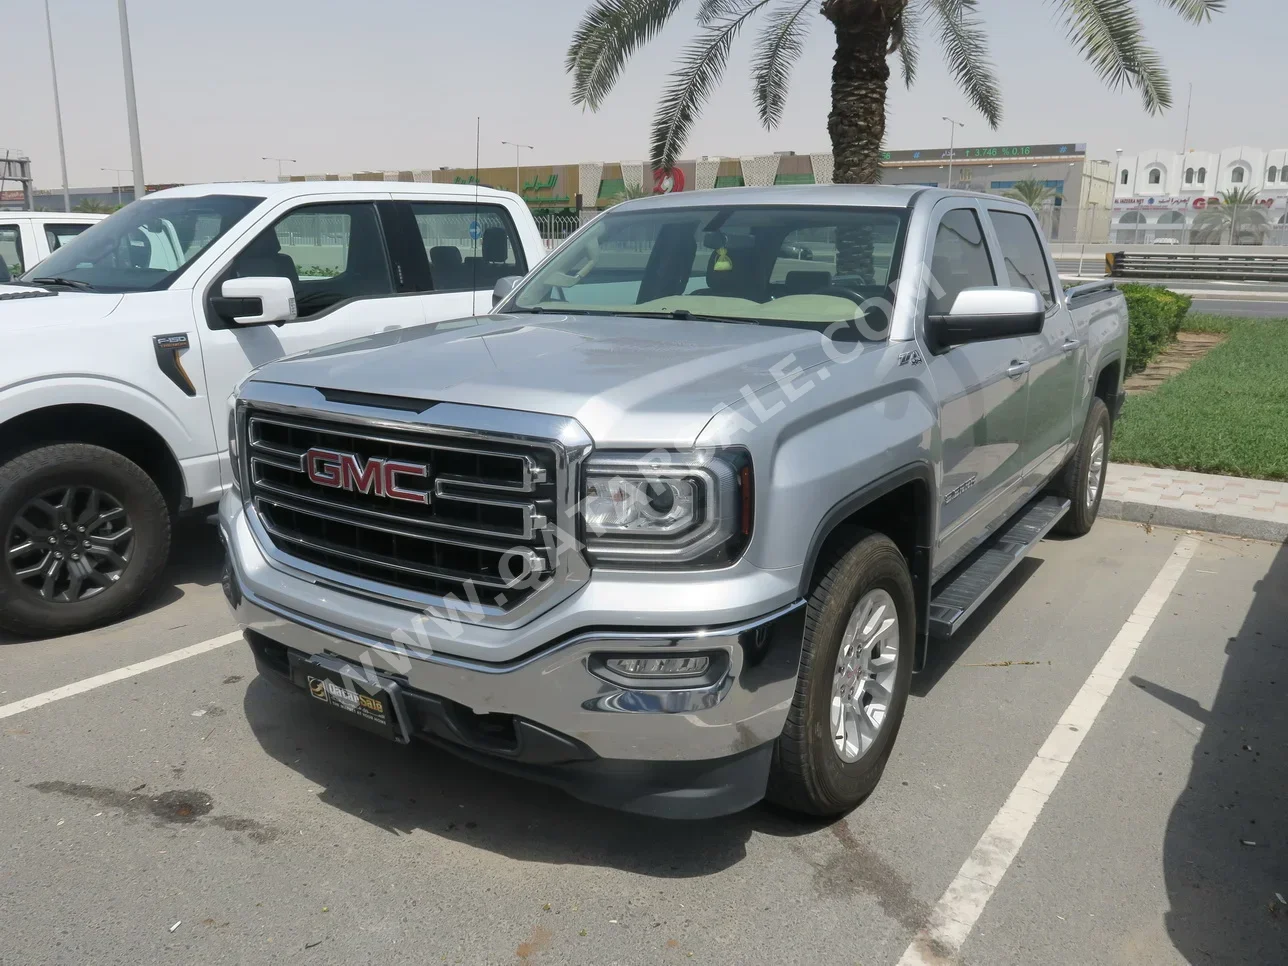 GMC  Sierra  1500  2017  Automatic  148,000 Km  8 Cylinder  Four Wheel Drive (4WD)  Pick Up  Silver